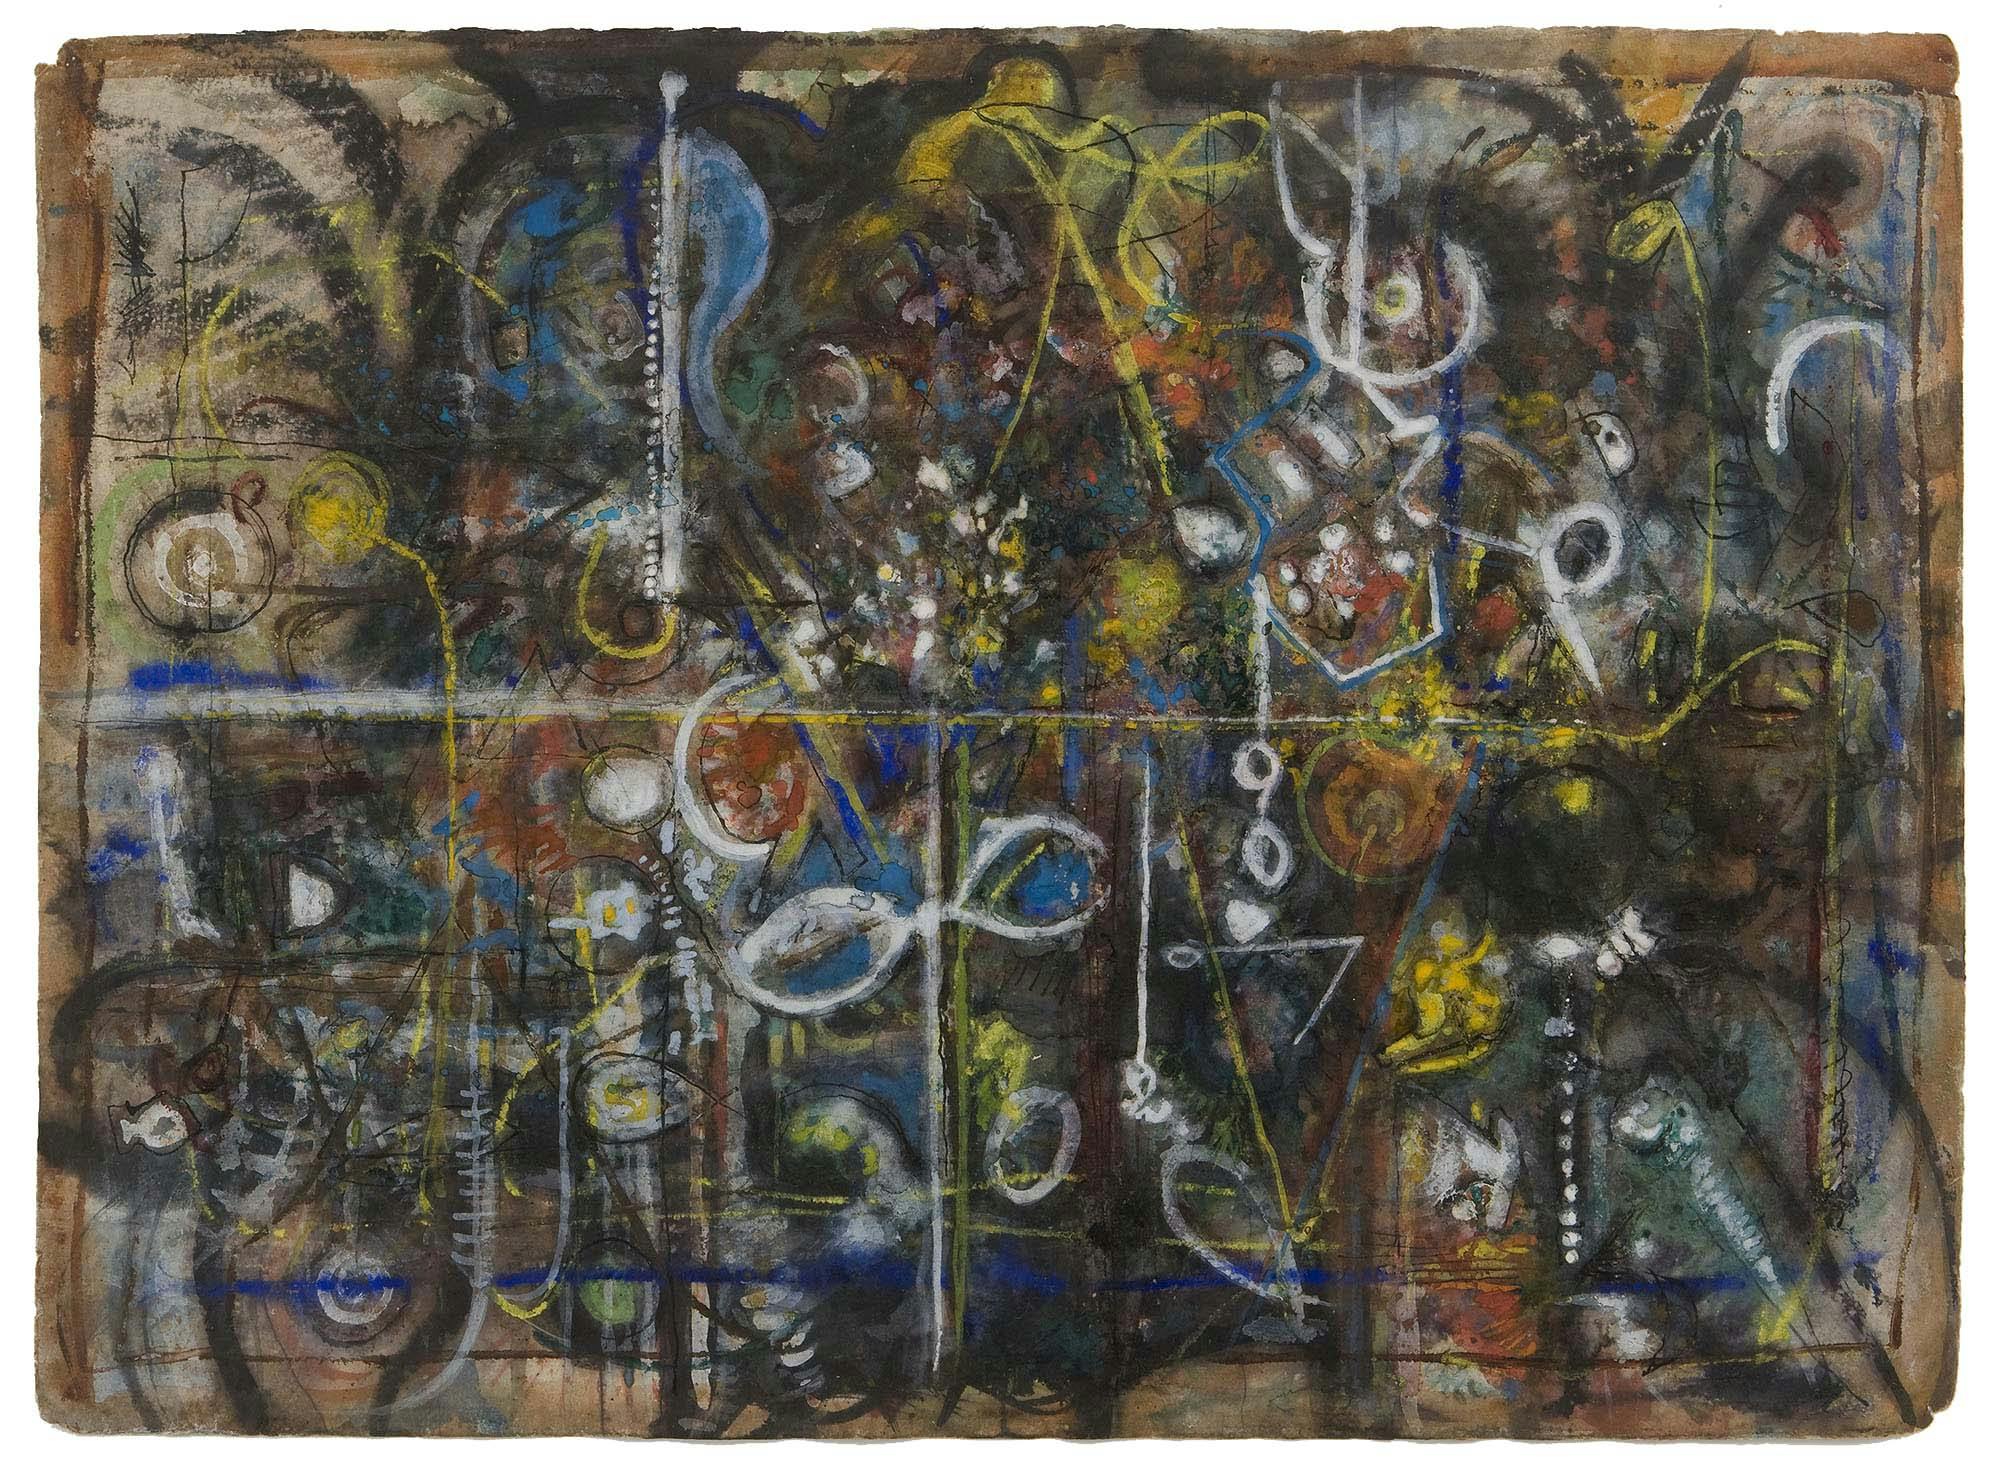 Noises of the City
1940
Watercolor gouache, pen, ink, and graphite on paper
23 1/2 x 31 in. (59.7 x 78.7 cm)
Whitney Museum of American Art, New York, Purchase, with funds from the Drawing Committee (2001.21)
 – The Richard Pousette-Dart Foundation